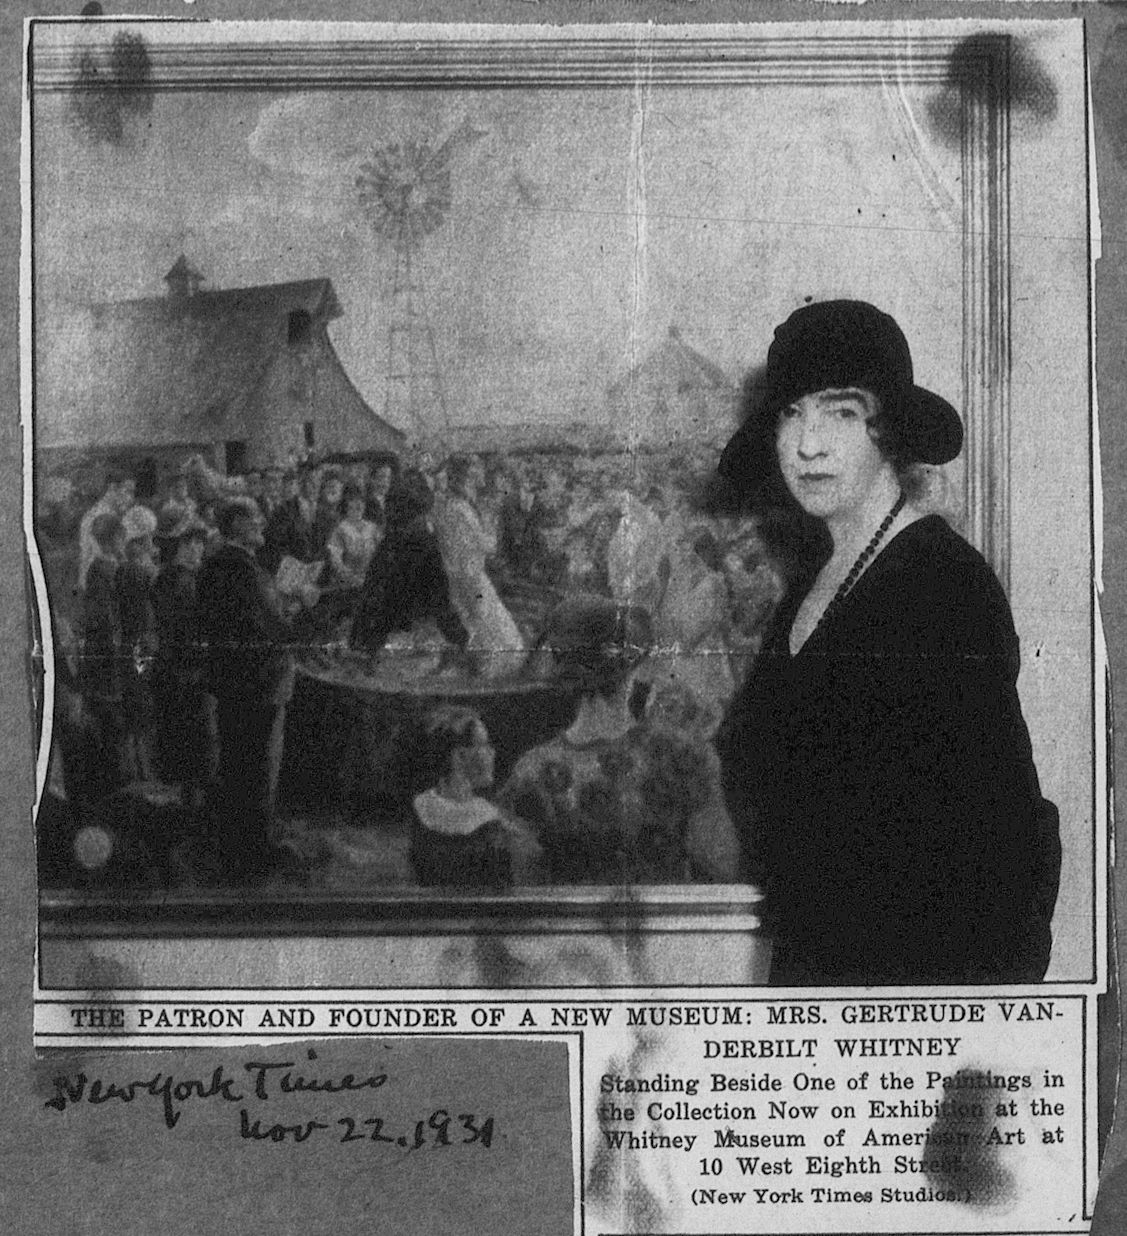 Newspaper clipping showing a photograph of a woman in a black hat standing in front of the painting in fig. 3. The headline reads "The patron and founder of a new museum: Mrs. Gertrude Vanderbilt Whitney." Underneath, in script, is written "New York Times / Nov 22. 1834"